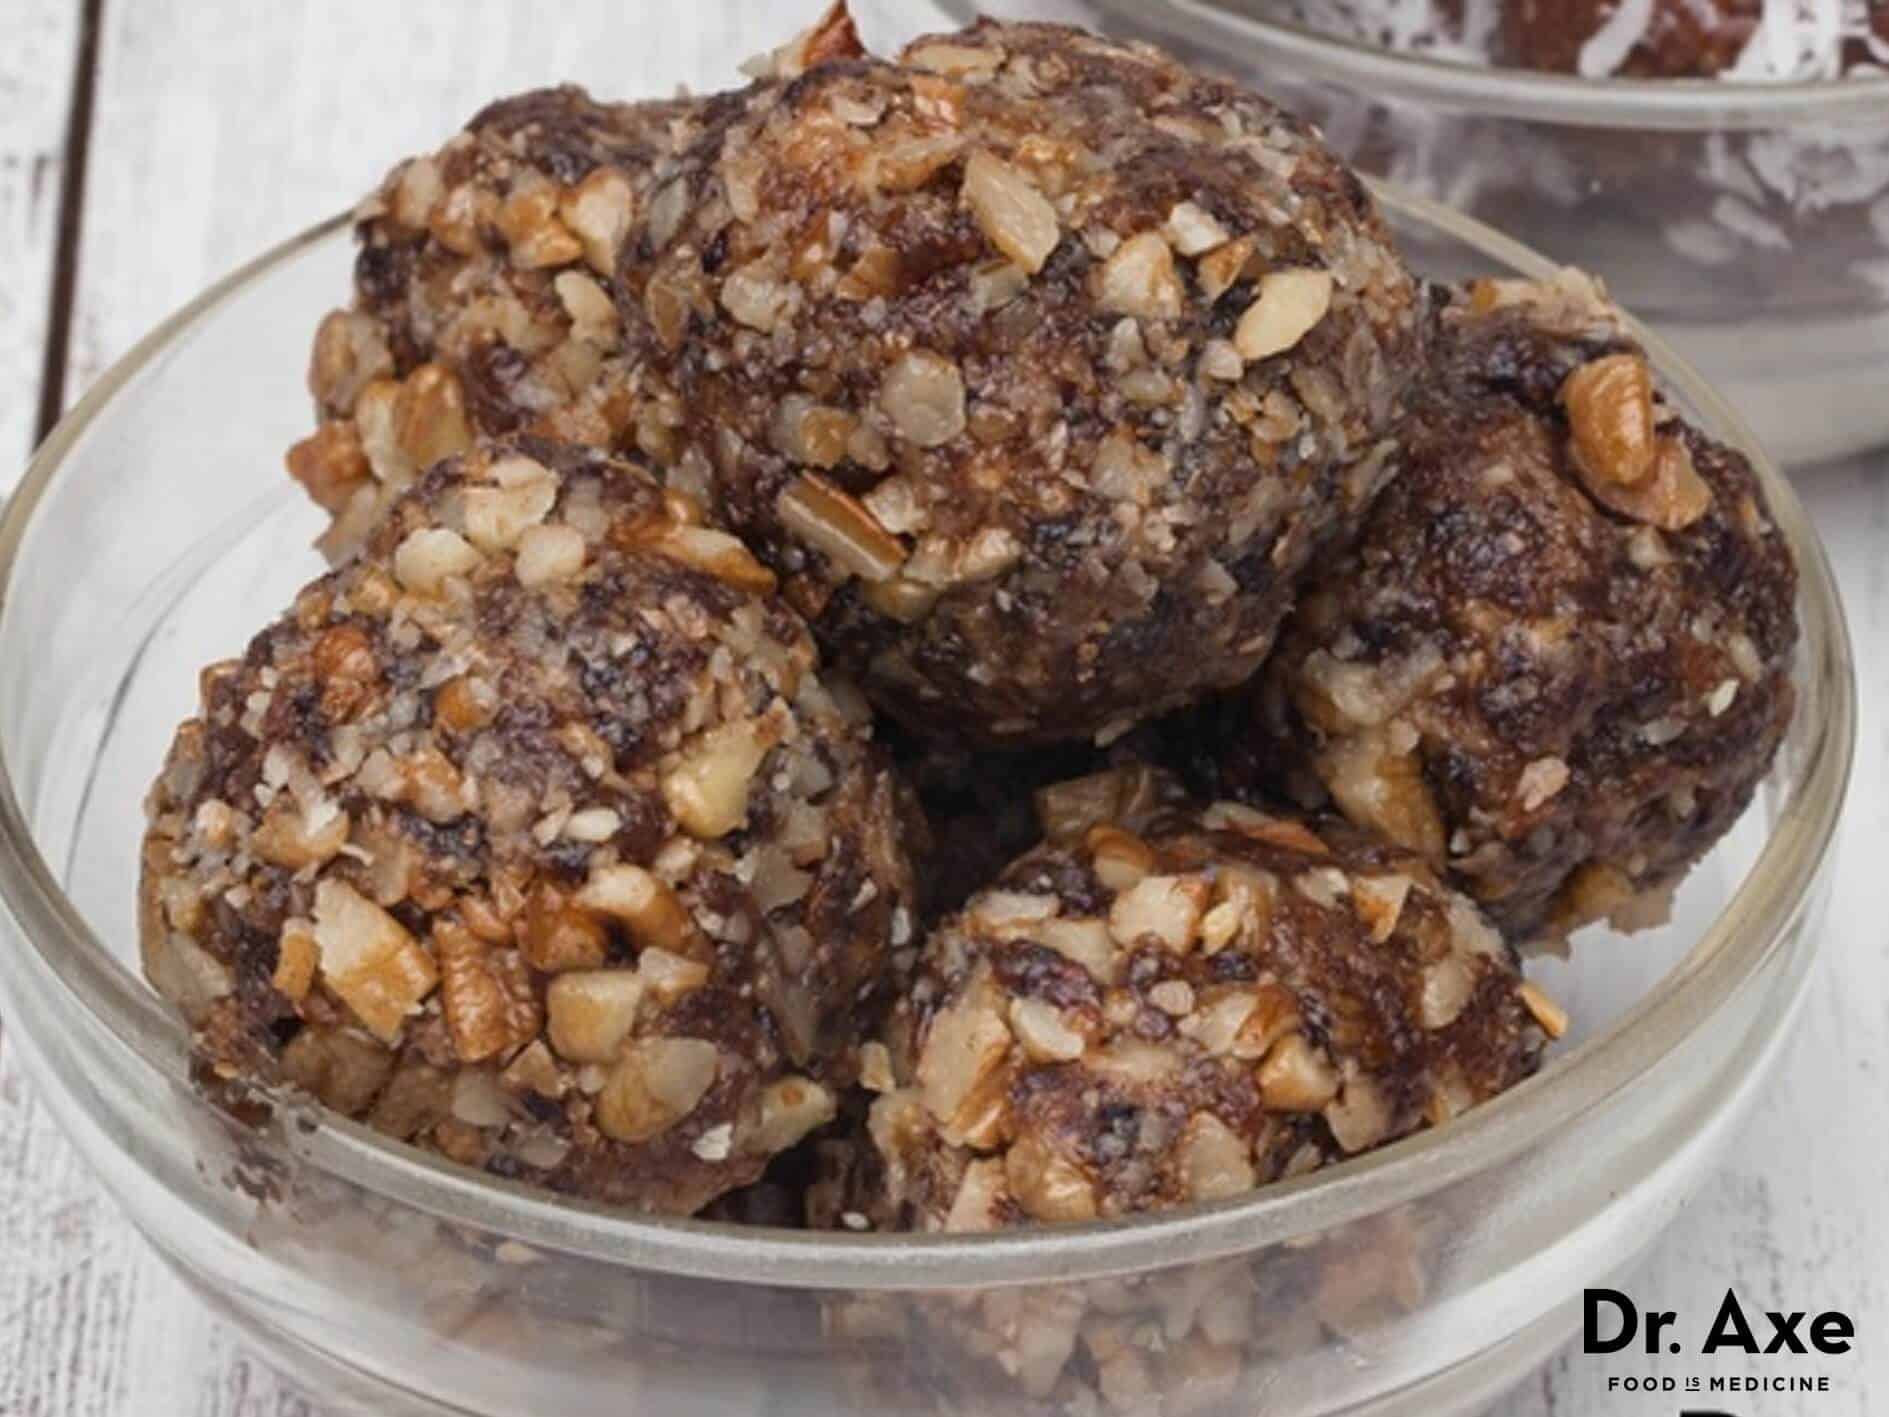 Raw brownie bites recipe - Dr. Axe